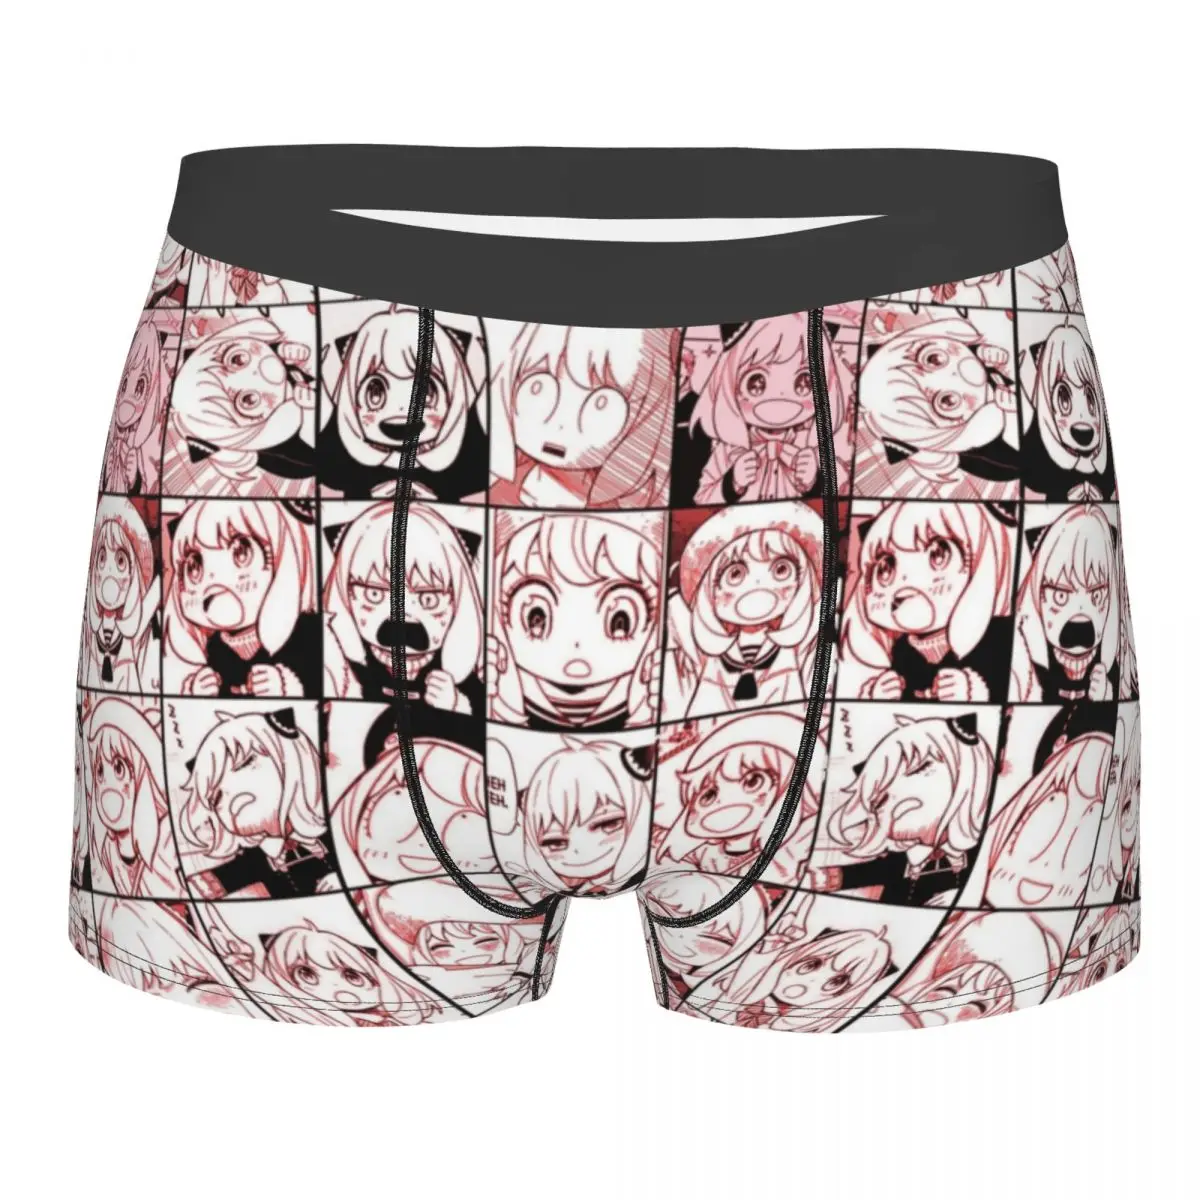 

Anya Forger Spy X Family Manga Panels Collage Man Underwear Boxer Briefs Shorts Panties Funny Polyester Underpants for Male